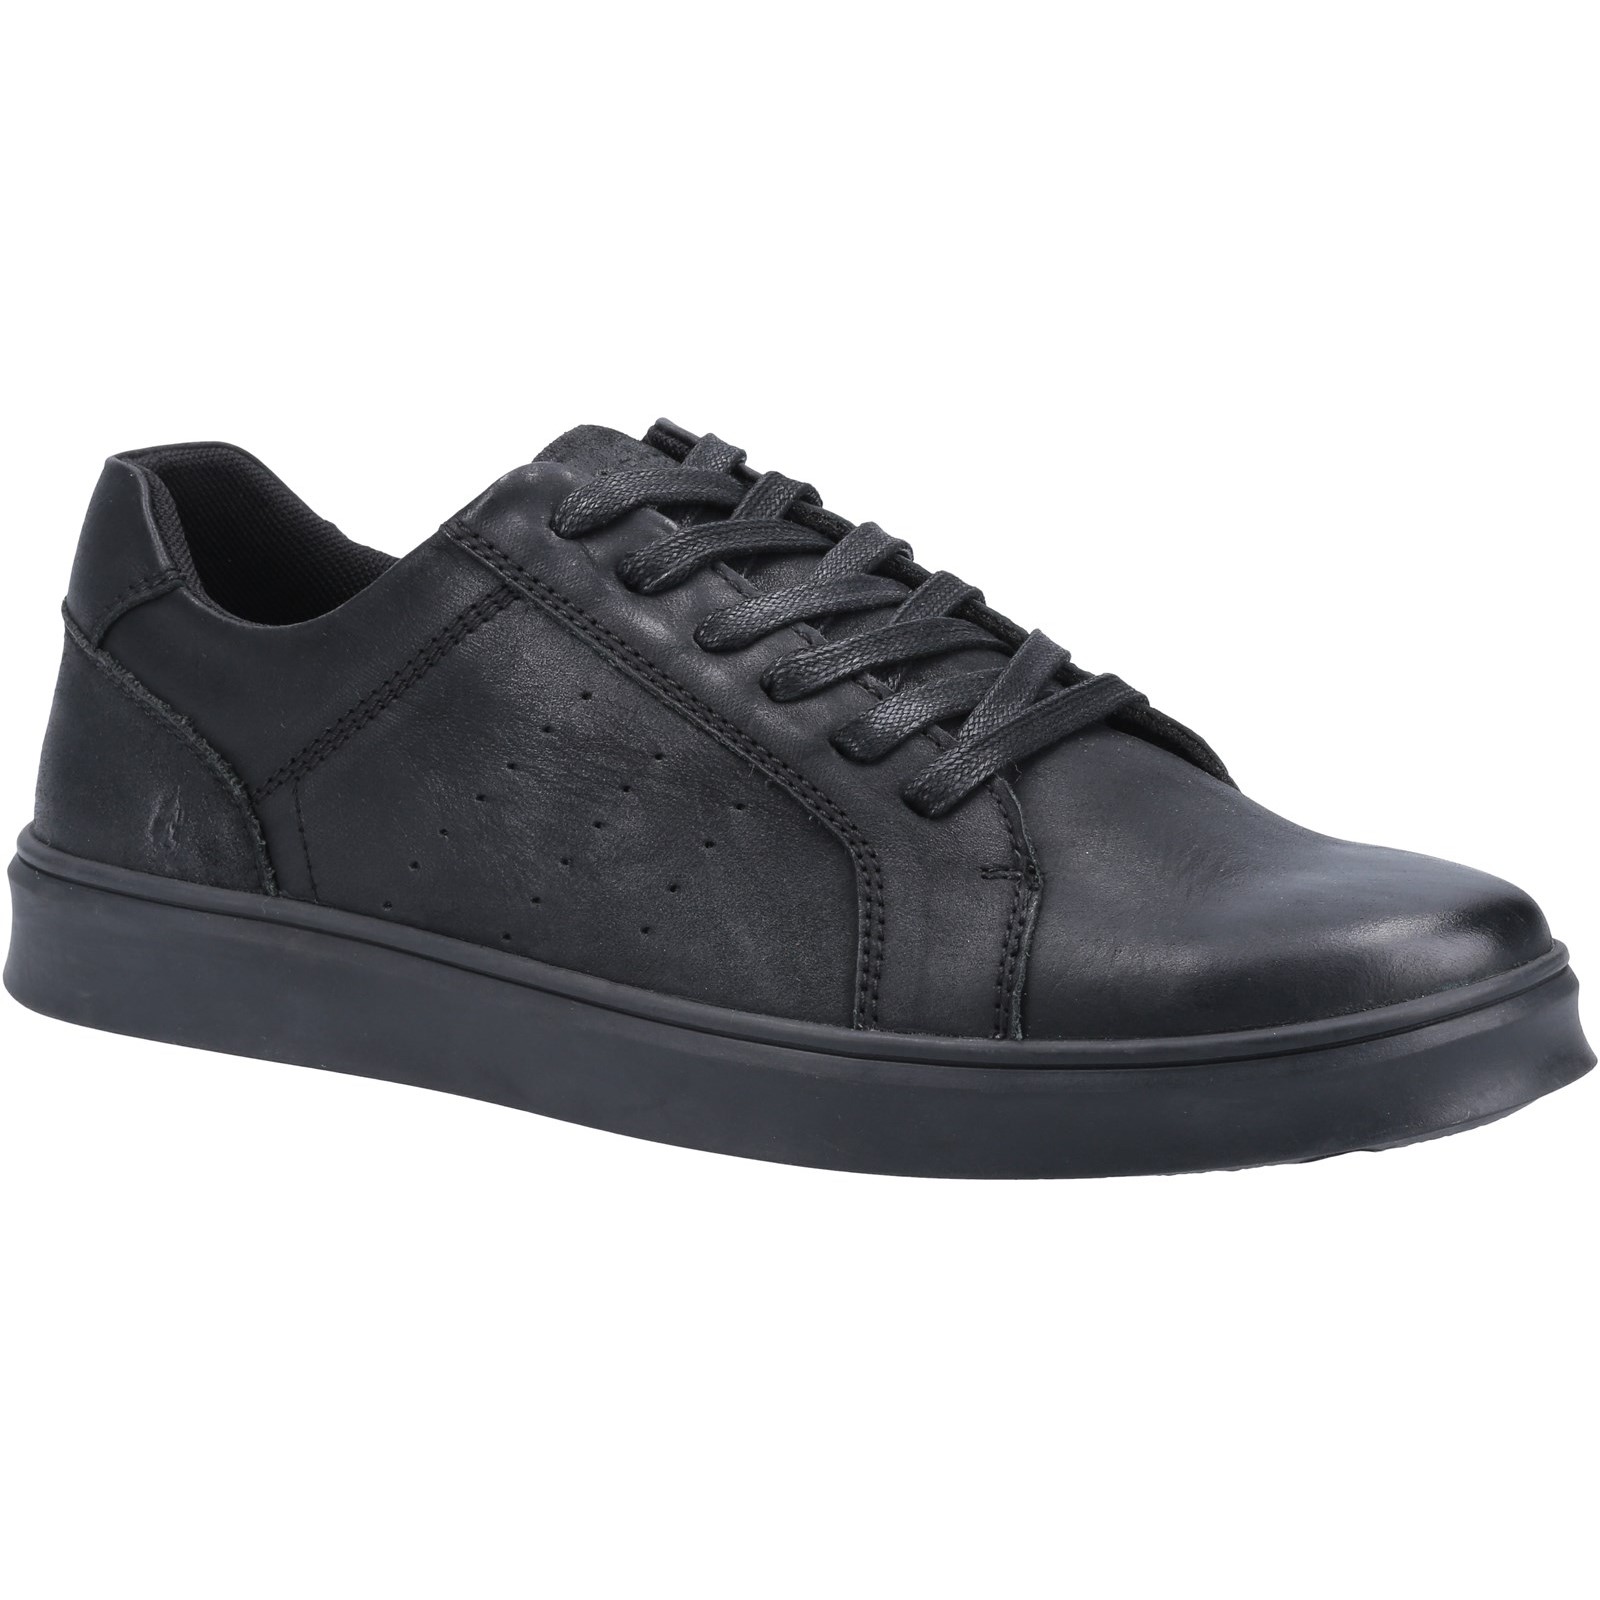 Hush Puppies Men's Mason Leather Lace Up Casual Trainers Shoes - UK 9